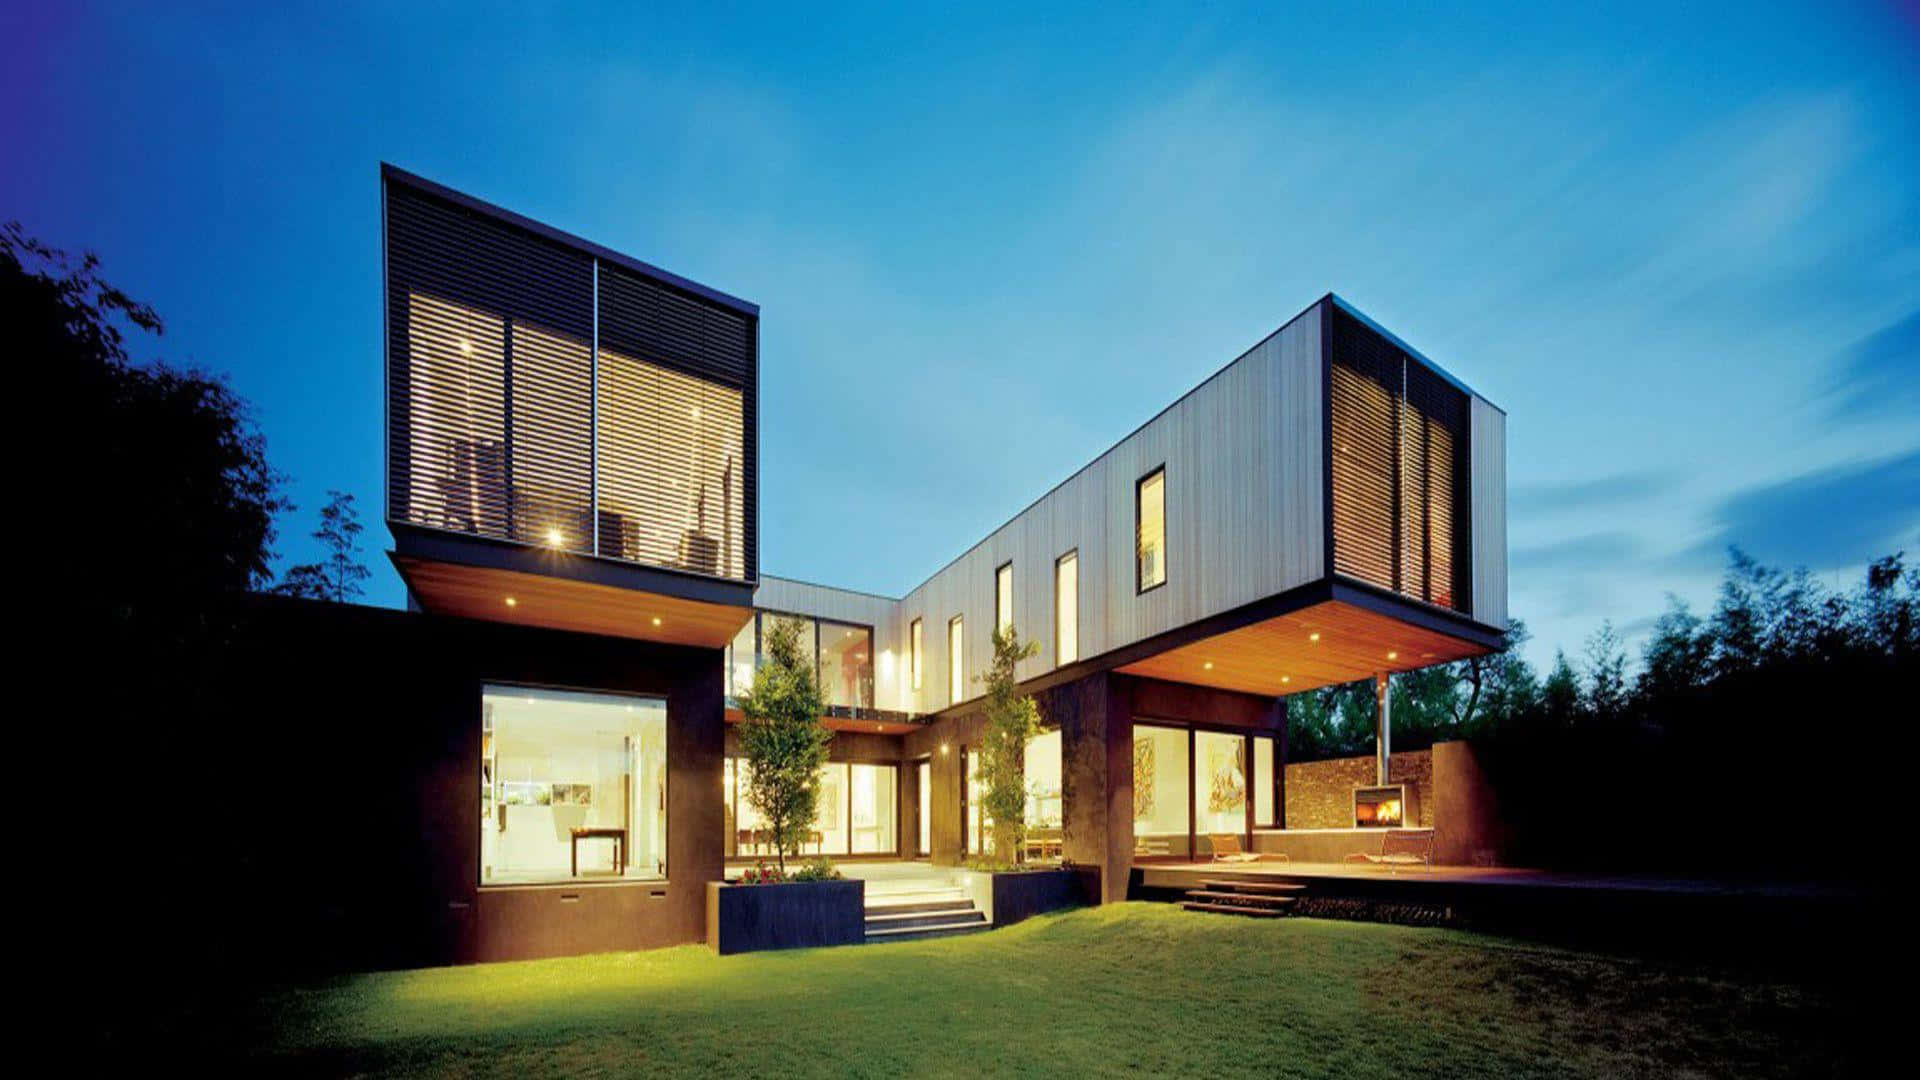 Gallery of MODERN HIGH-TECH INDIVIDUAL HOUSE | Modern House Architecture &  Design | Media - 3